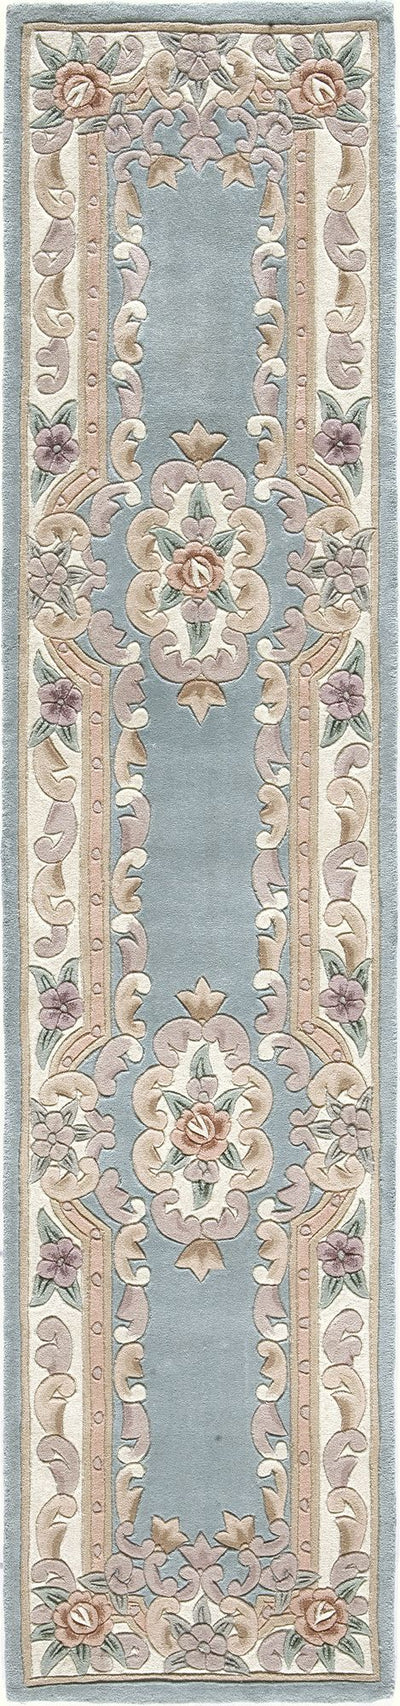 Rugs America New Aubusson 510-292 Light Green Area Rug